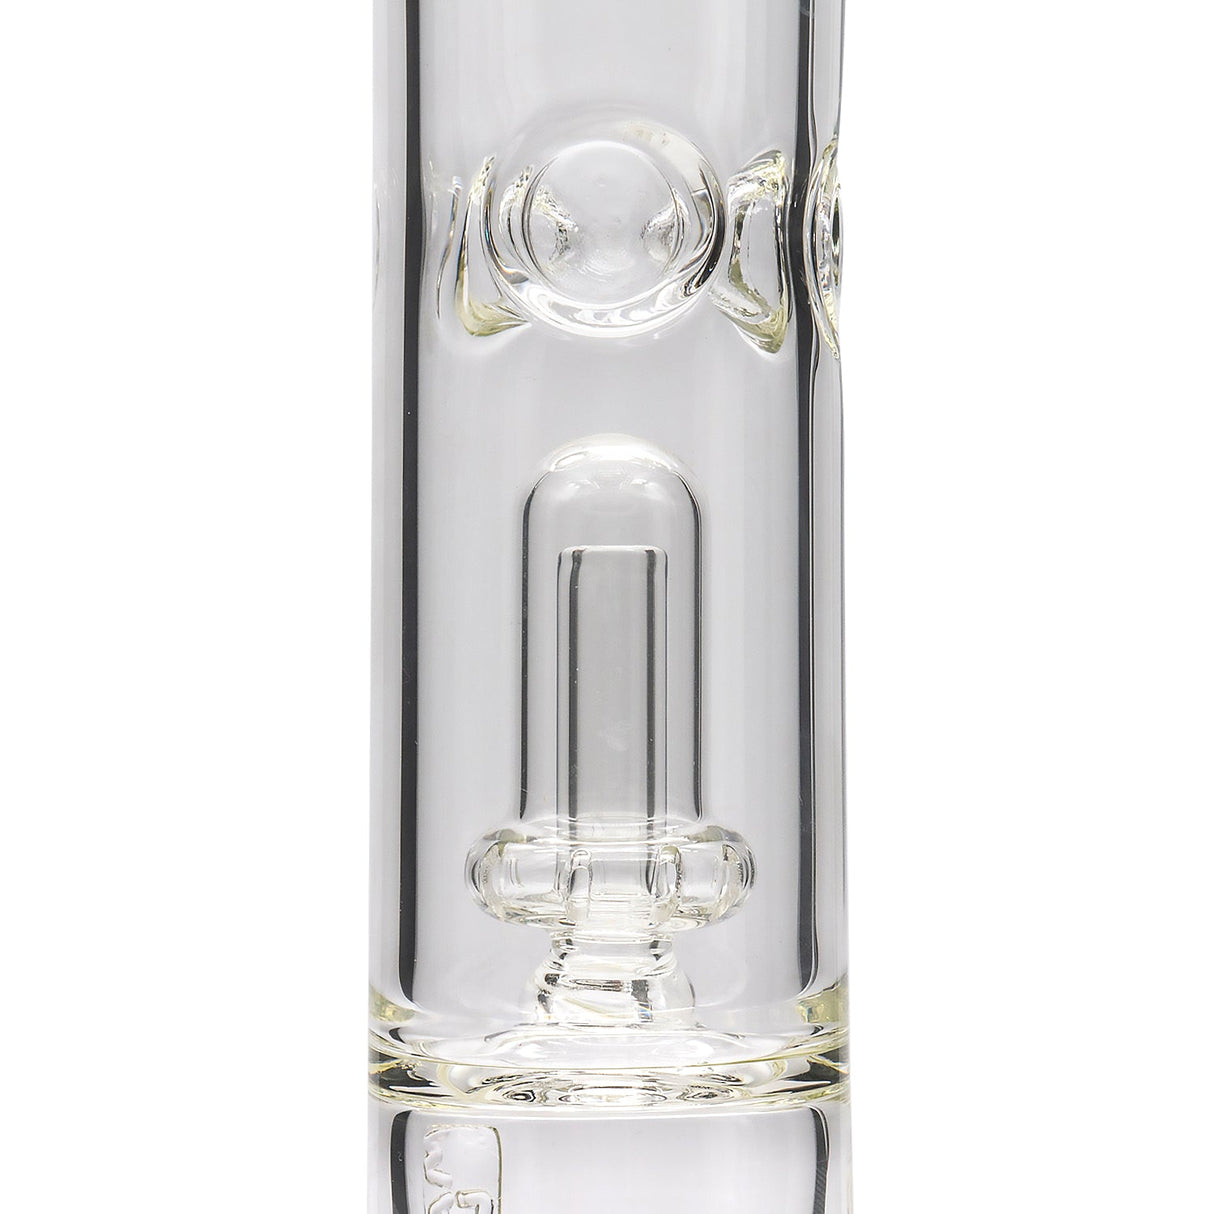 Close-up of LA Pipes Thick Glass Beaker Bong with Showerhead Perc, clear borosilicate glass